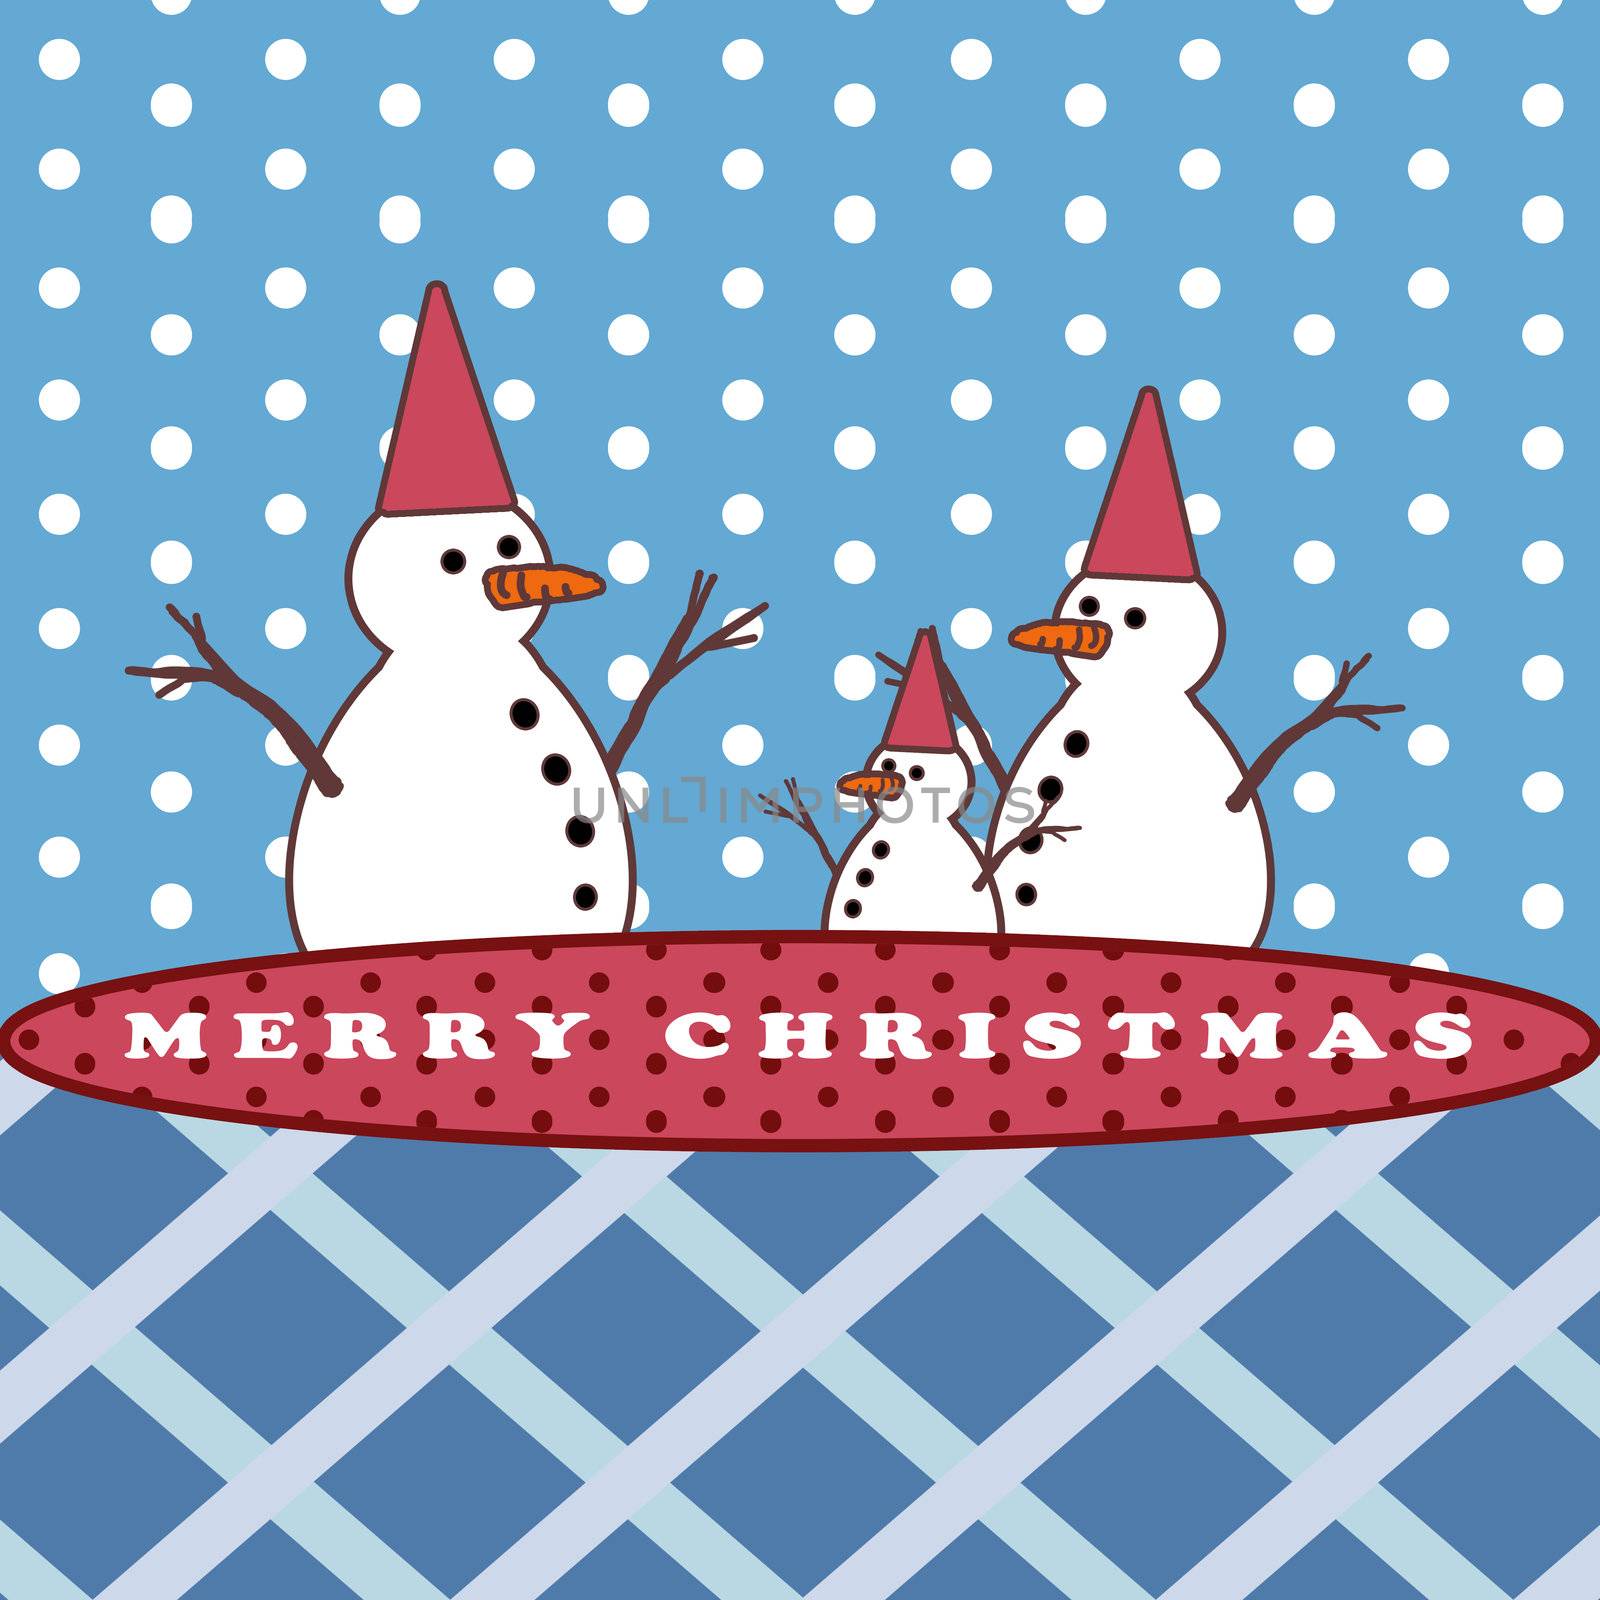 Snowman and the snowing, Christmas greeting card background